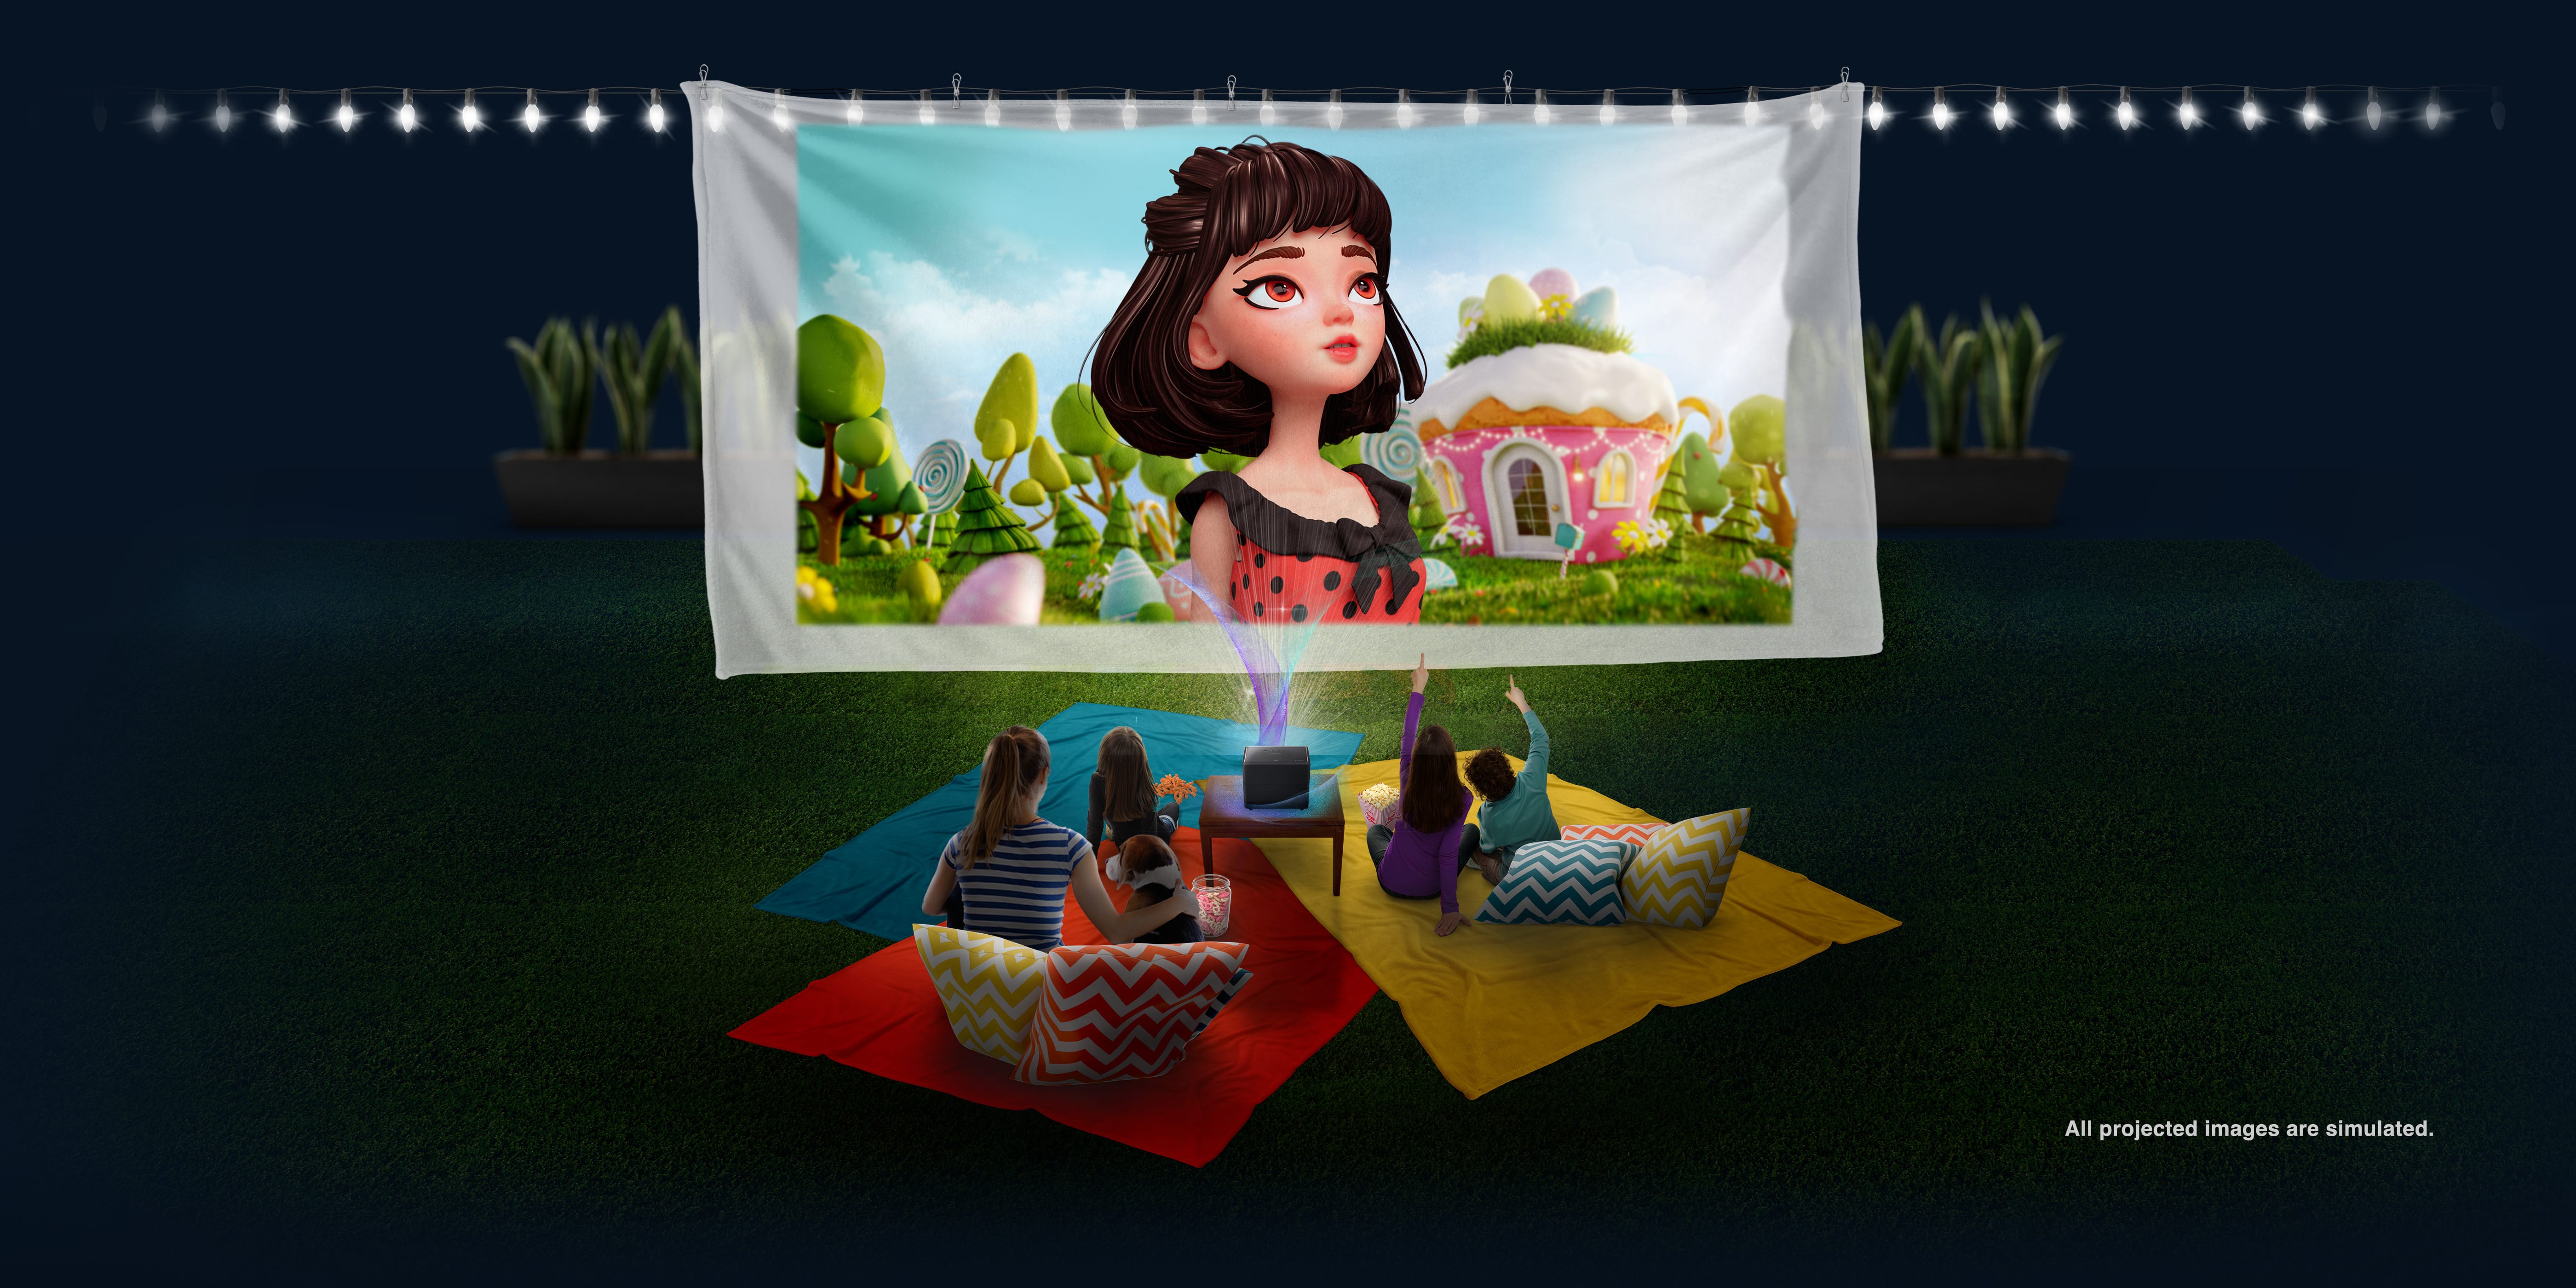 EpiqVision is perfect for backyard movie night.